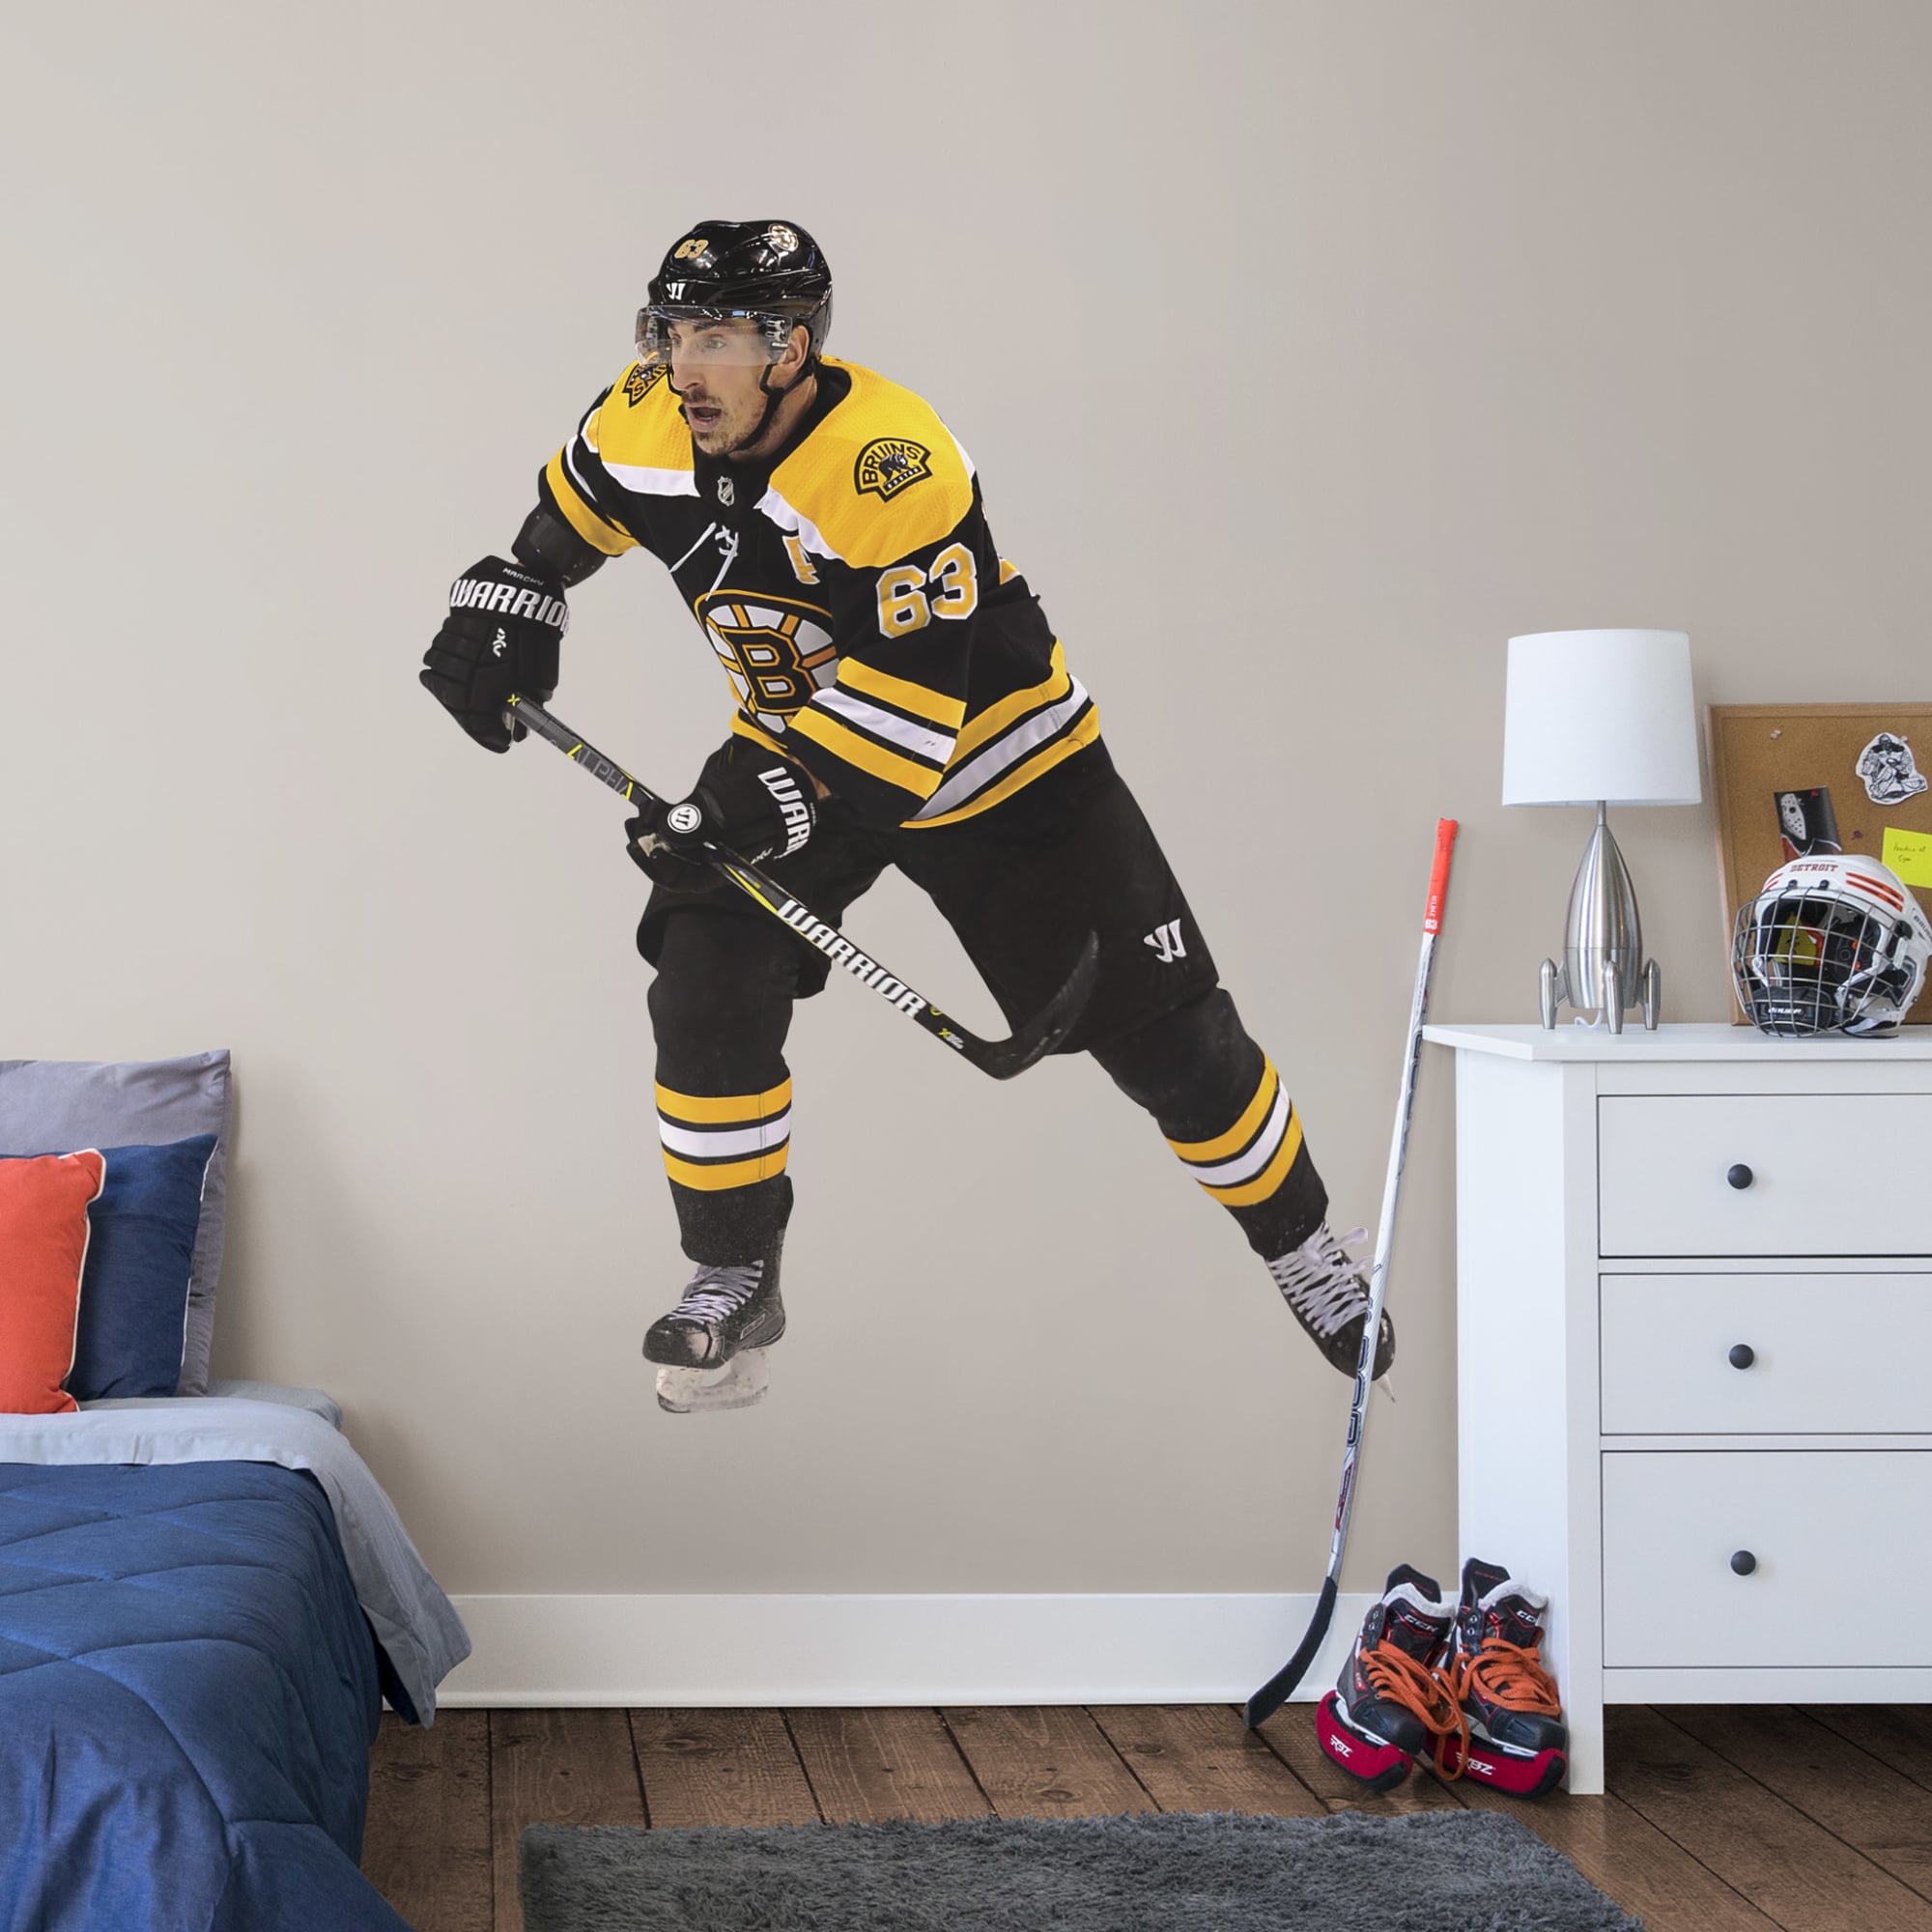 Brad Marchand for Boston Bruins - Officially Licensed NHL Removable Wall Decal Life-Size Athlete + 2 Decals (58"W x 70"H) by Fat